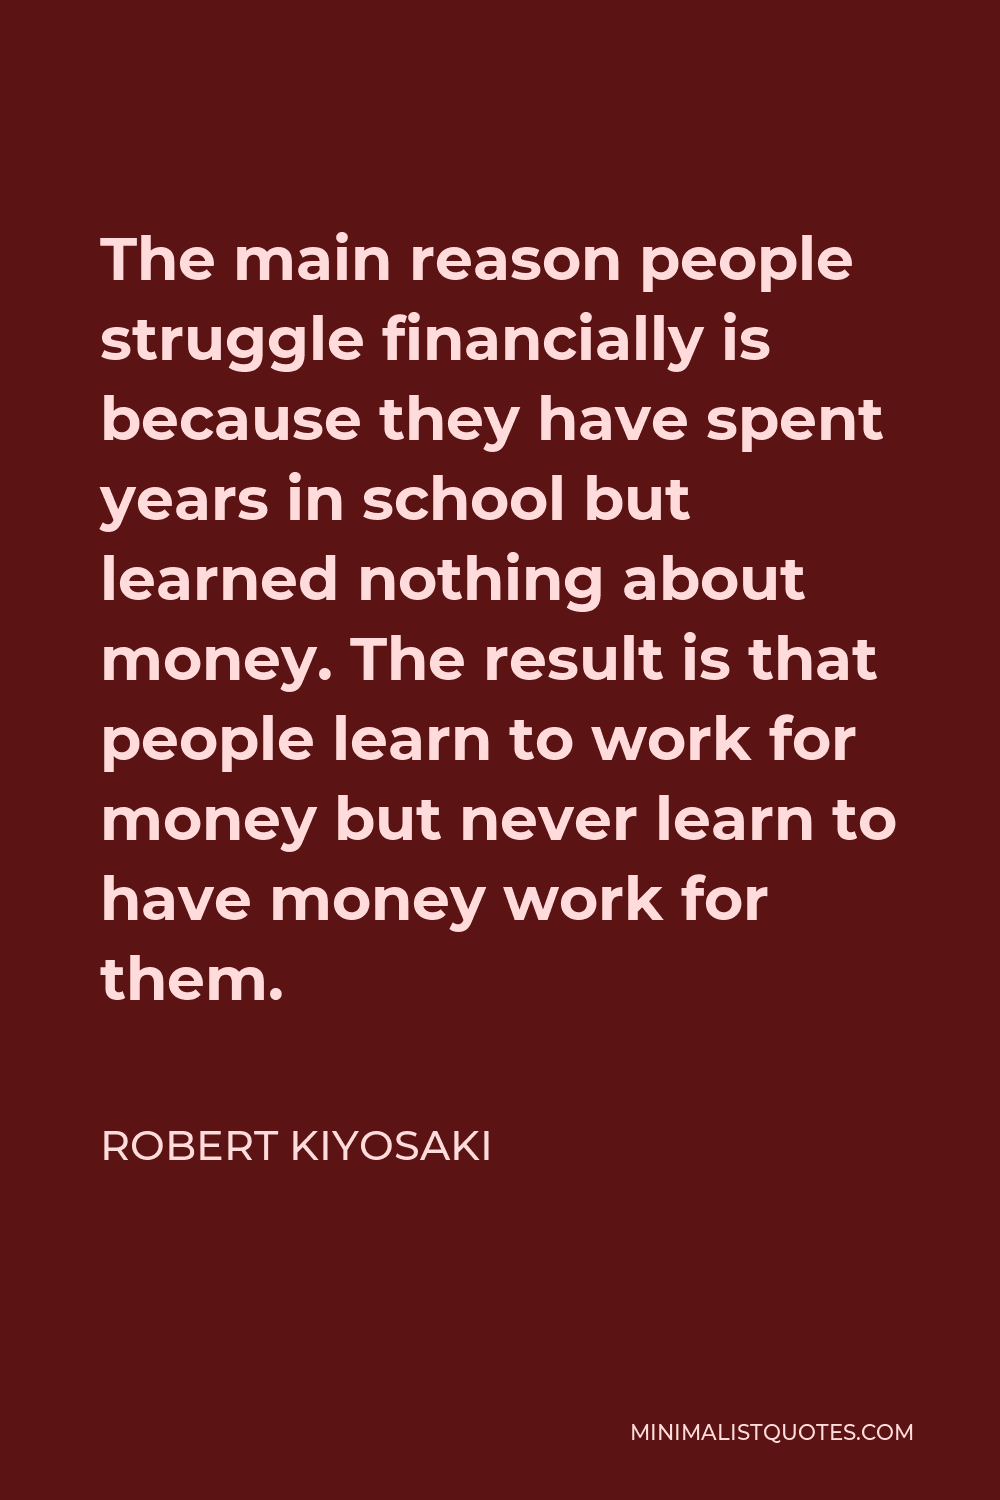 Robert Kiyosaki Quote - The main reason people struggle financially is because they have spent years in school but learned nothing about money. The result is that people learn to work for money but never learn to have money work for them.